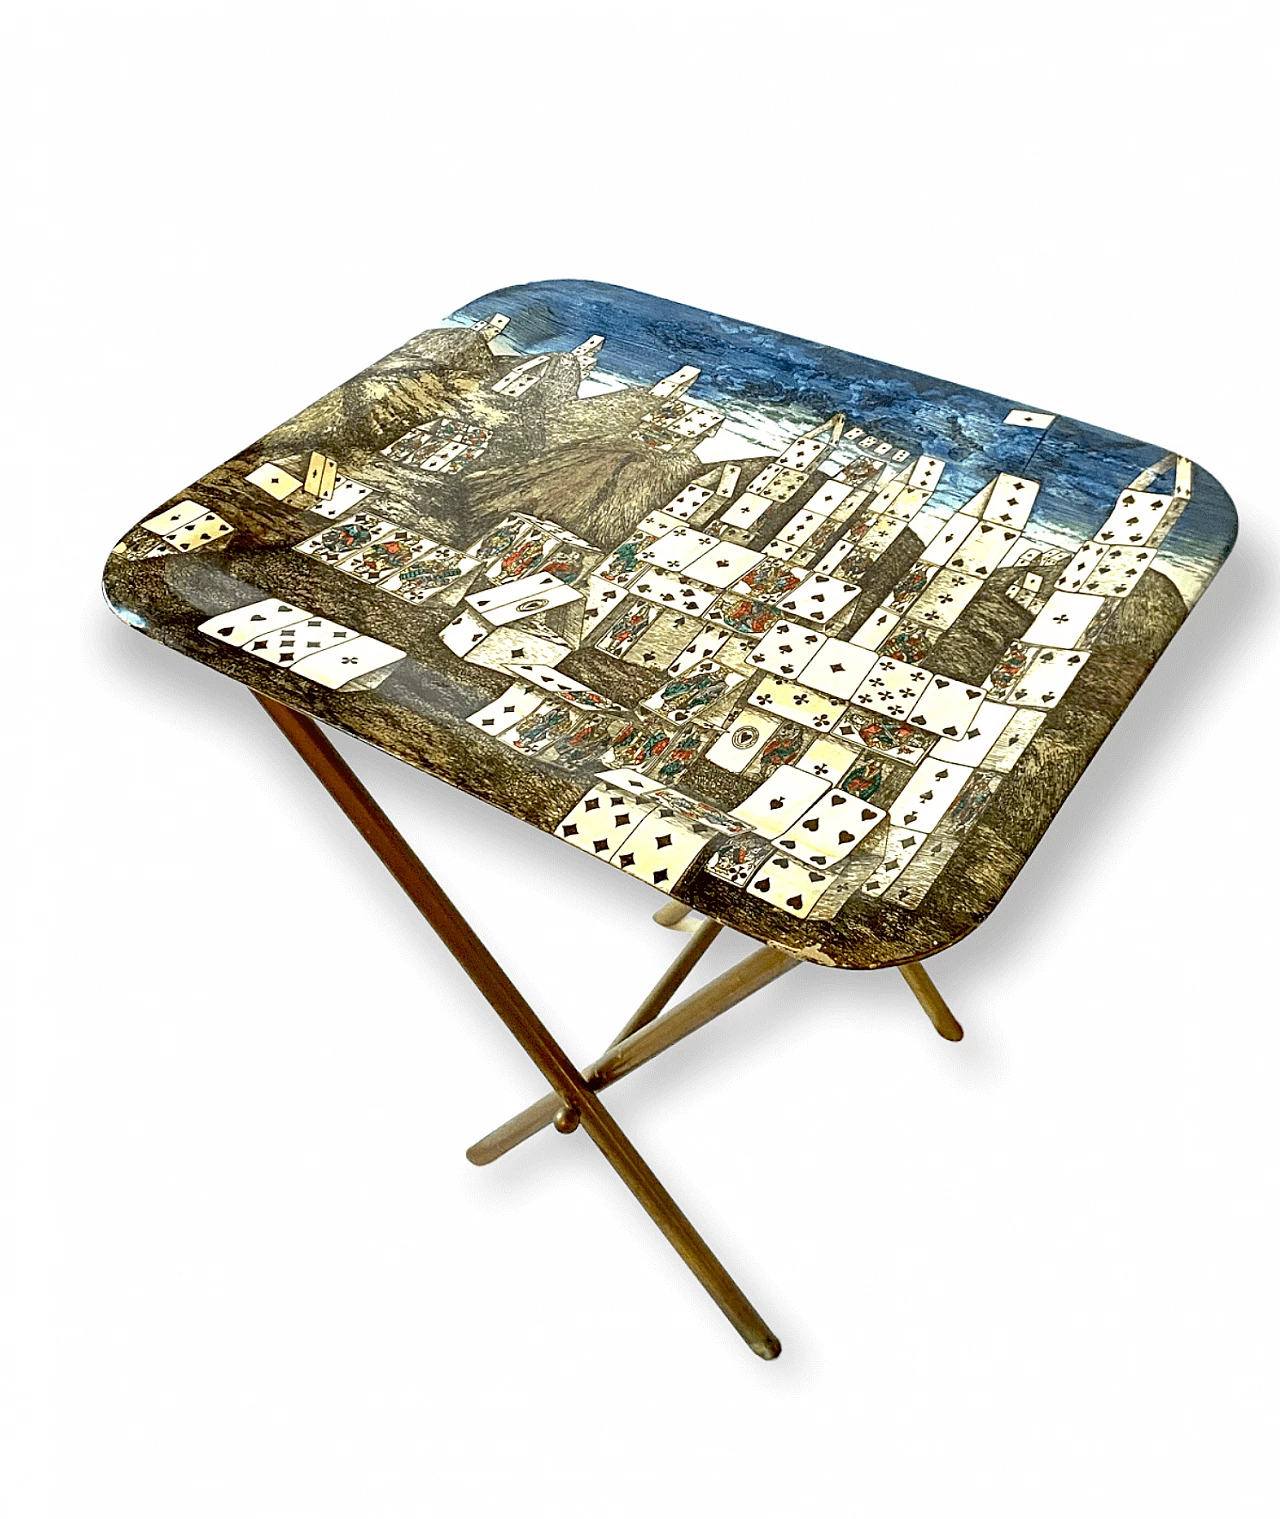 Folding City of Cards coffee table by Piero Fornasetti, 1950s 24